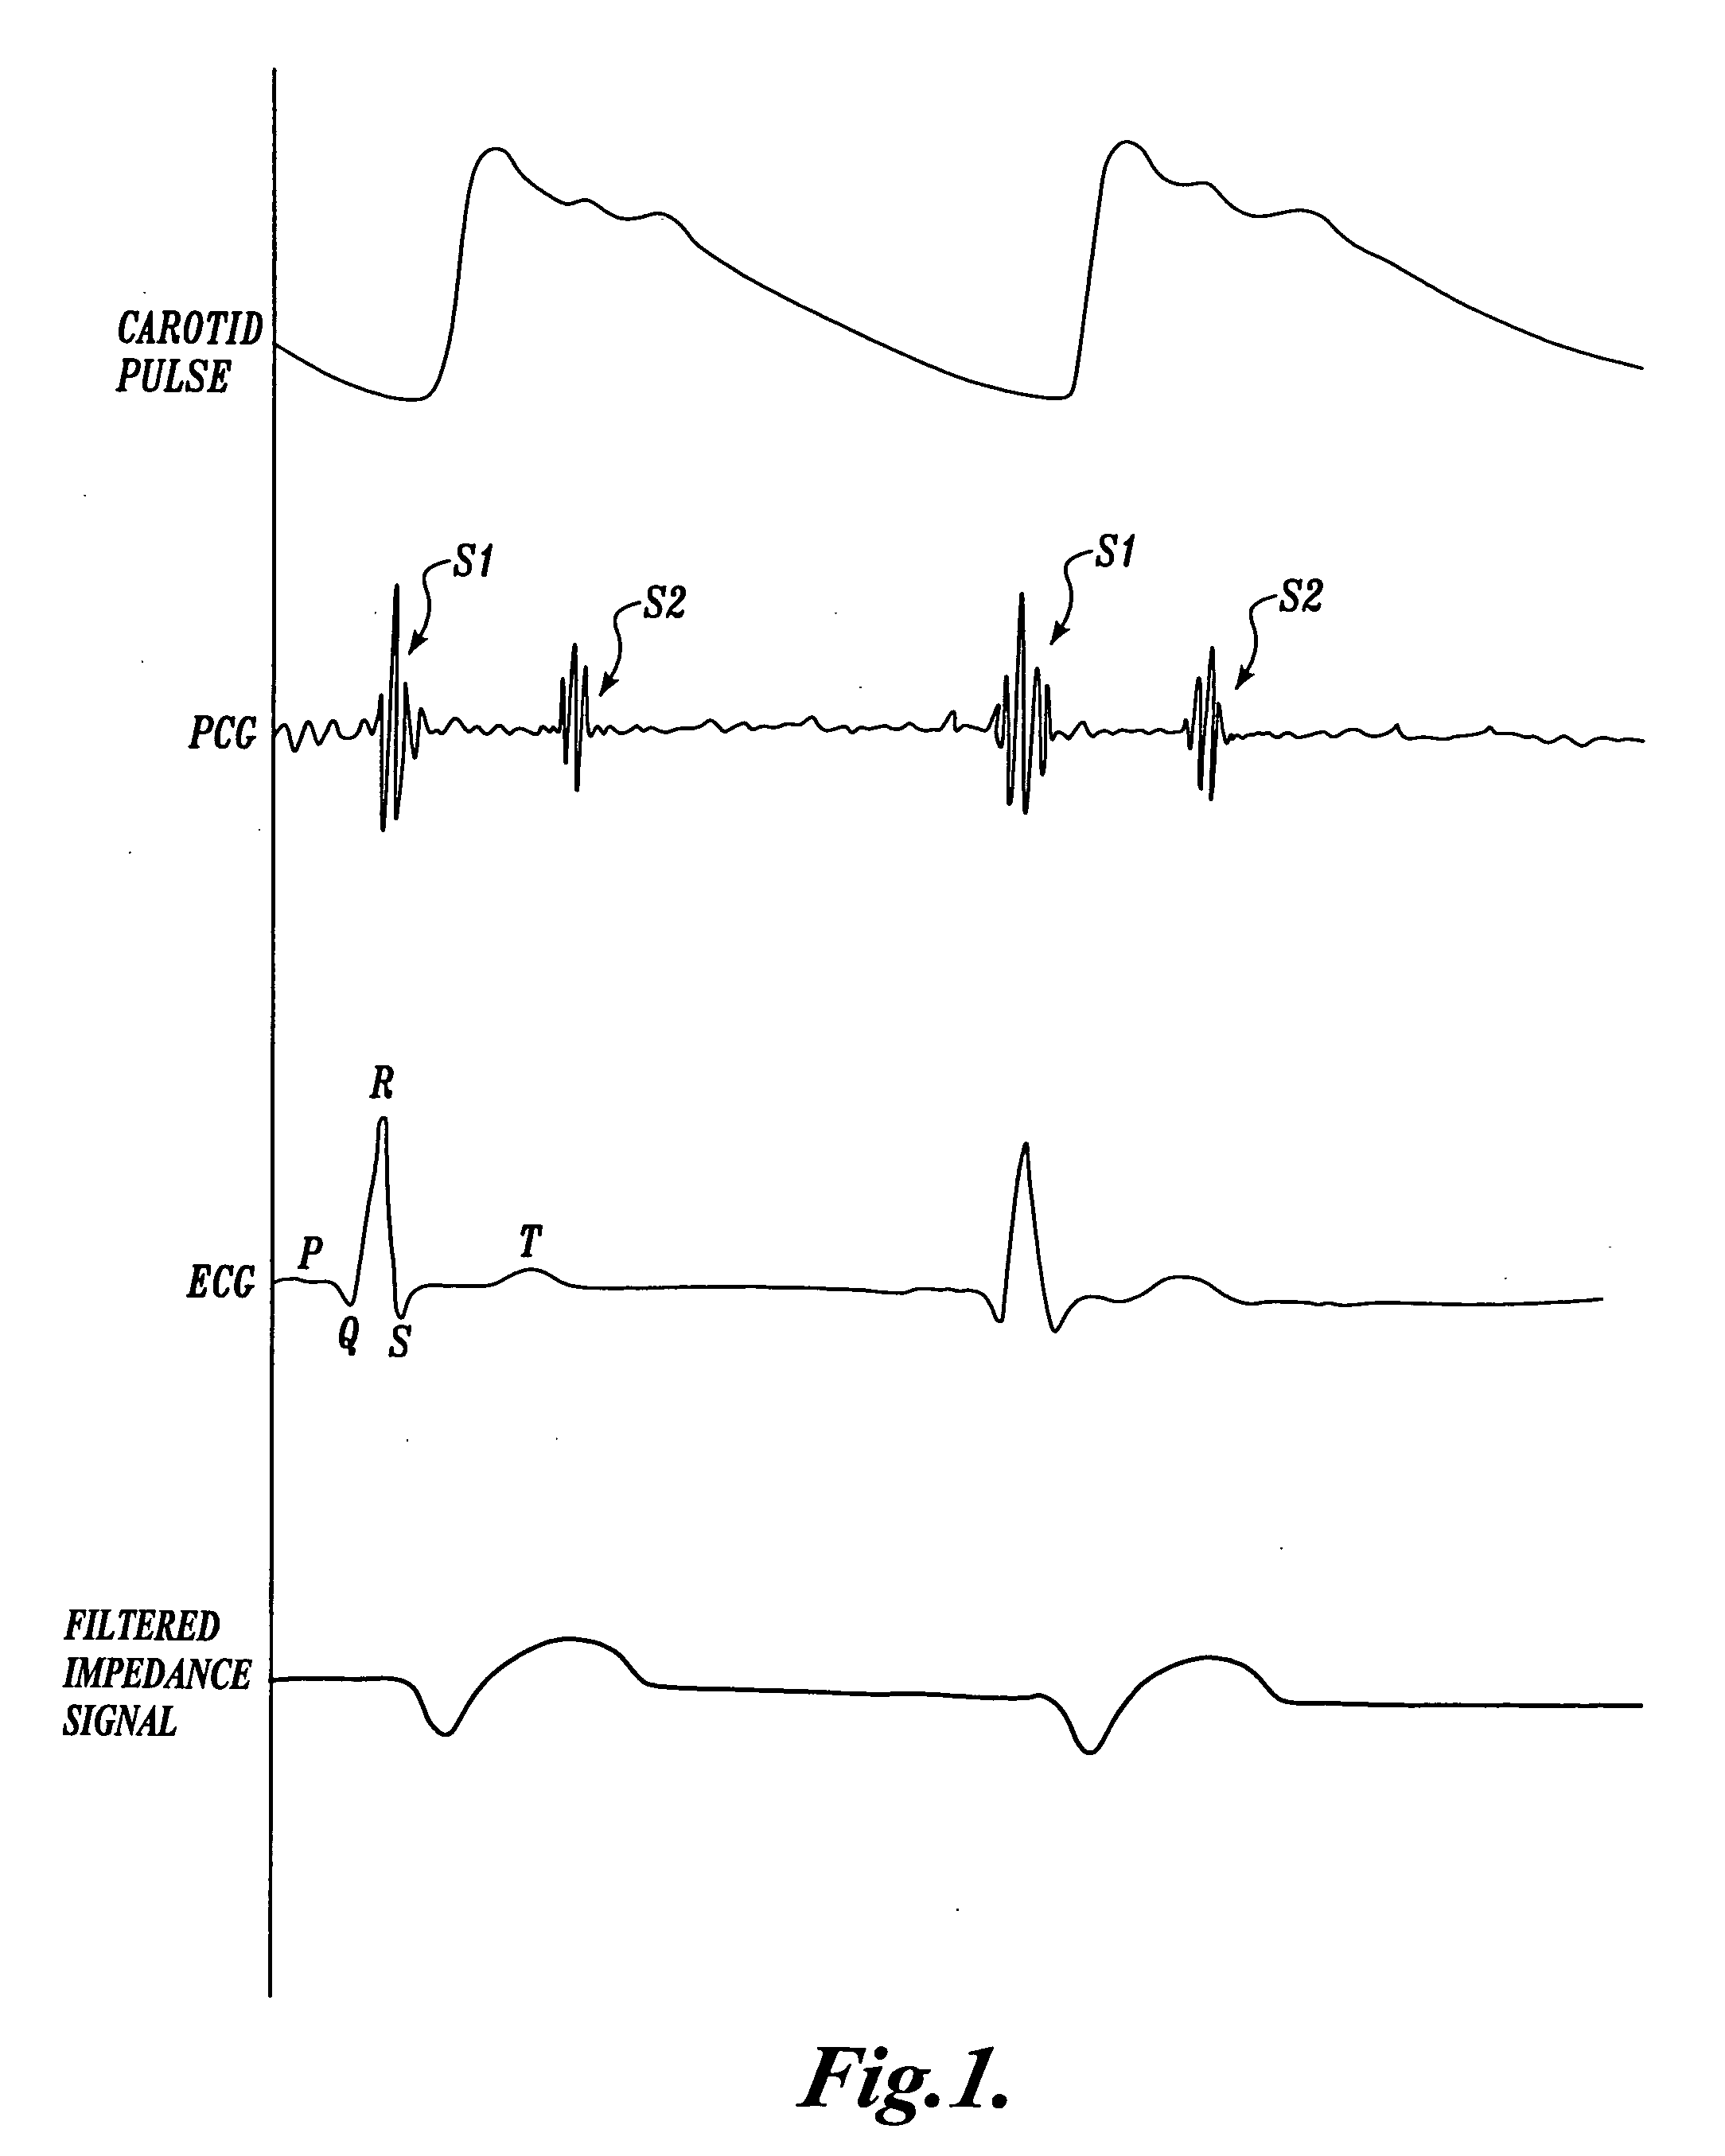 Pulse detection apparatus, software, and methods using patient physiological signals